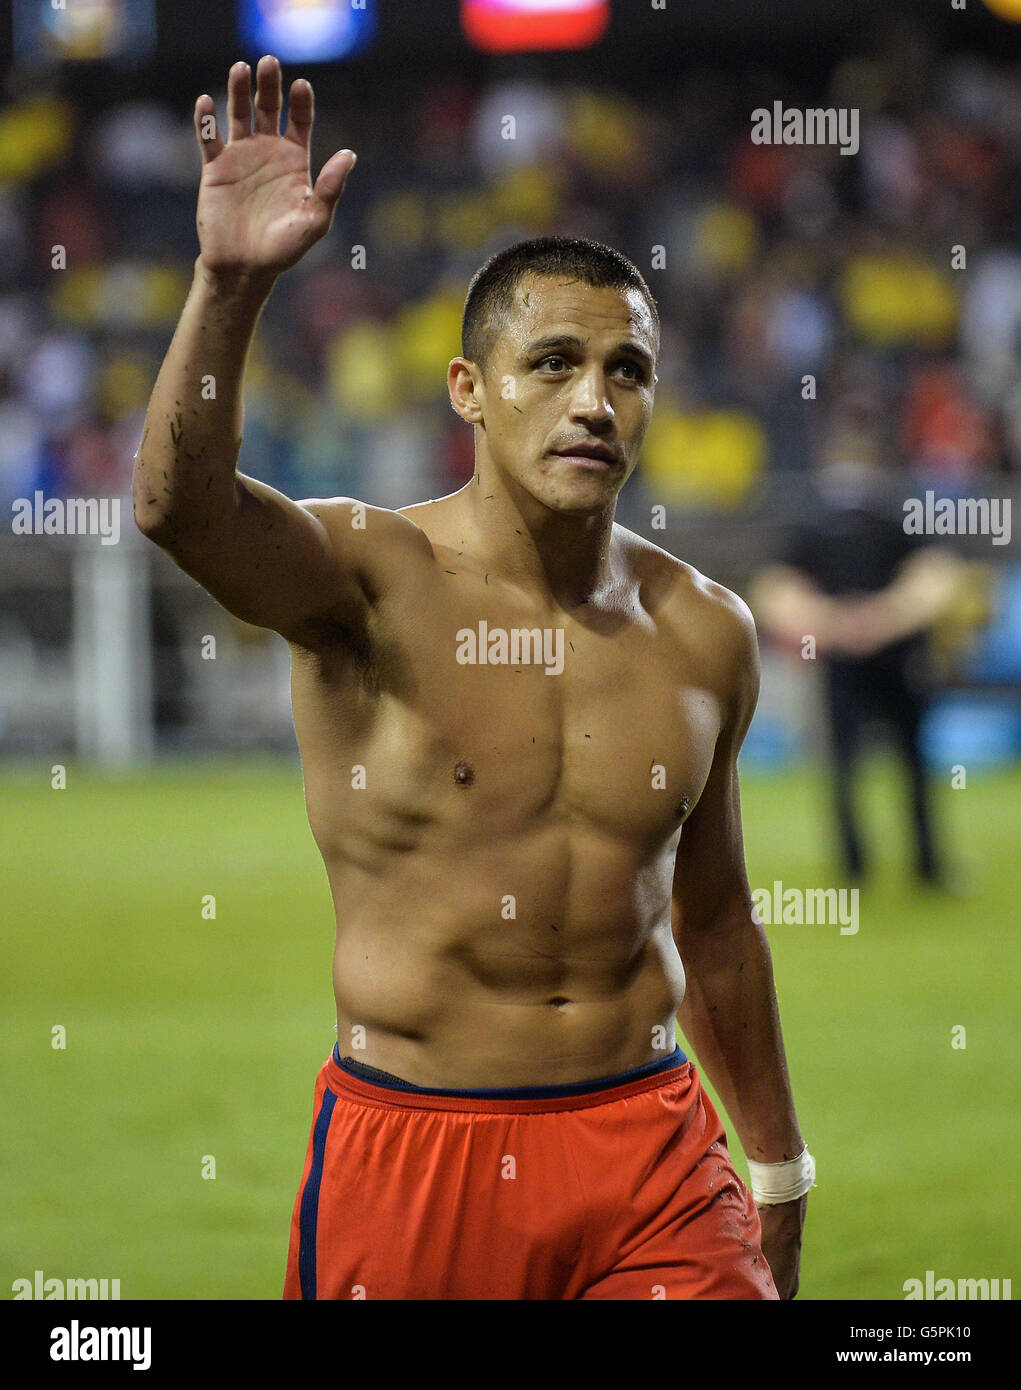 Chicago, USA. 22nd June, 2016. Chile's Alexis Sanchez waves to the crowd after the Copa America Centenario semifinal football match against Colombia in Chicago, Illinois, the United States, on June 22, 2016. Chile won 2-0. Credit:  Bao Dandan/Xinhua/Alamy Live News Stock Photo